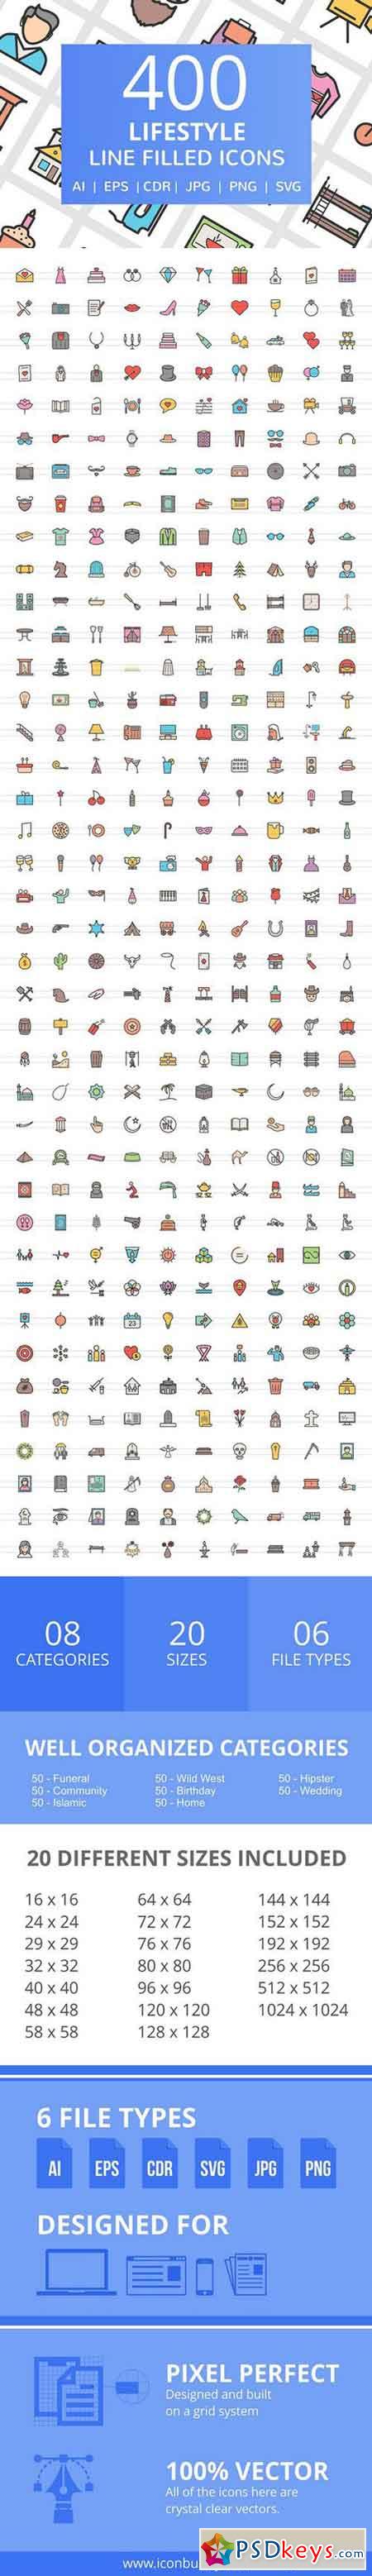 400 Lifestyle Filled Line Icons 2356921